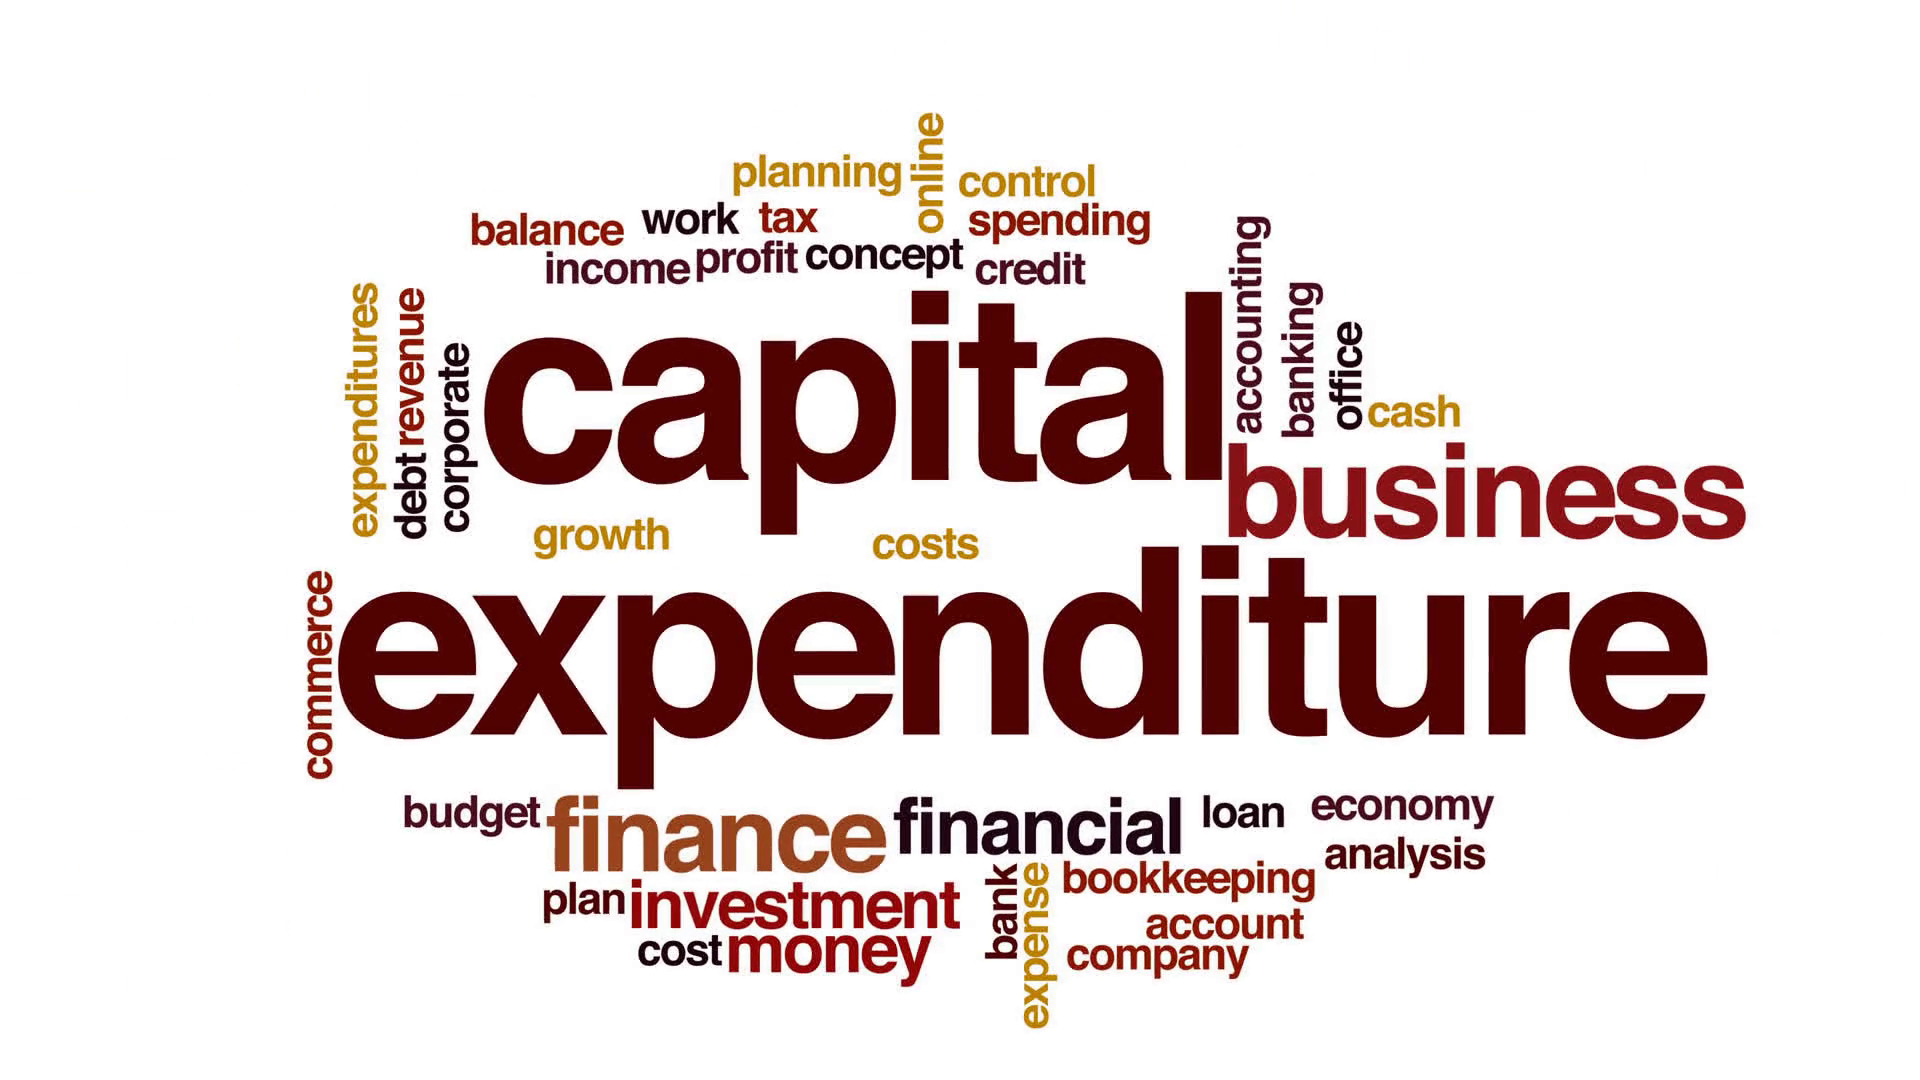 Govt only succeeded in spending 40% of the budget designated for capital expenditures